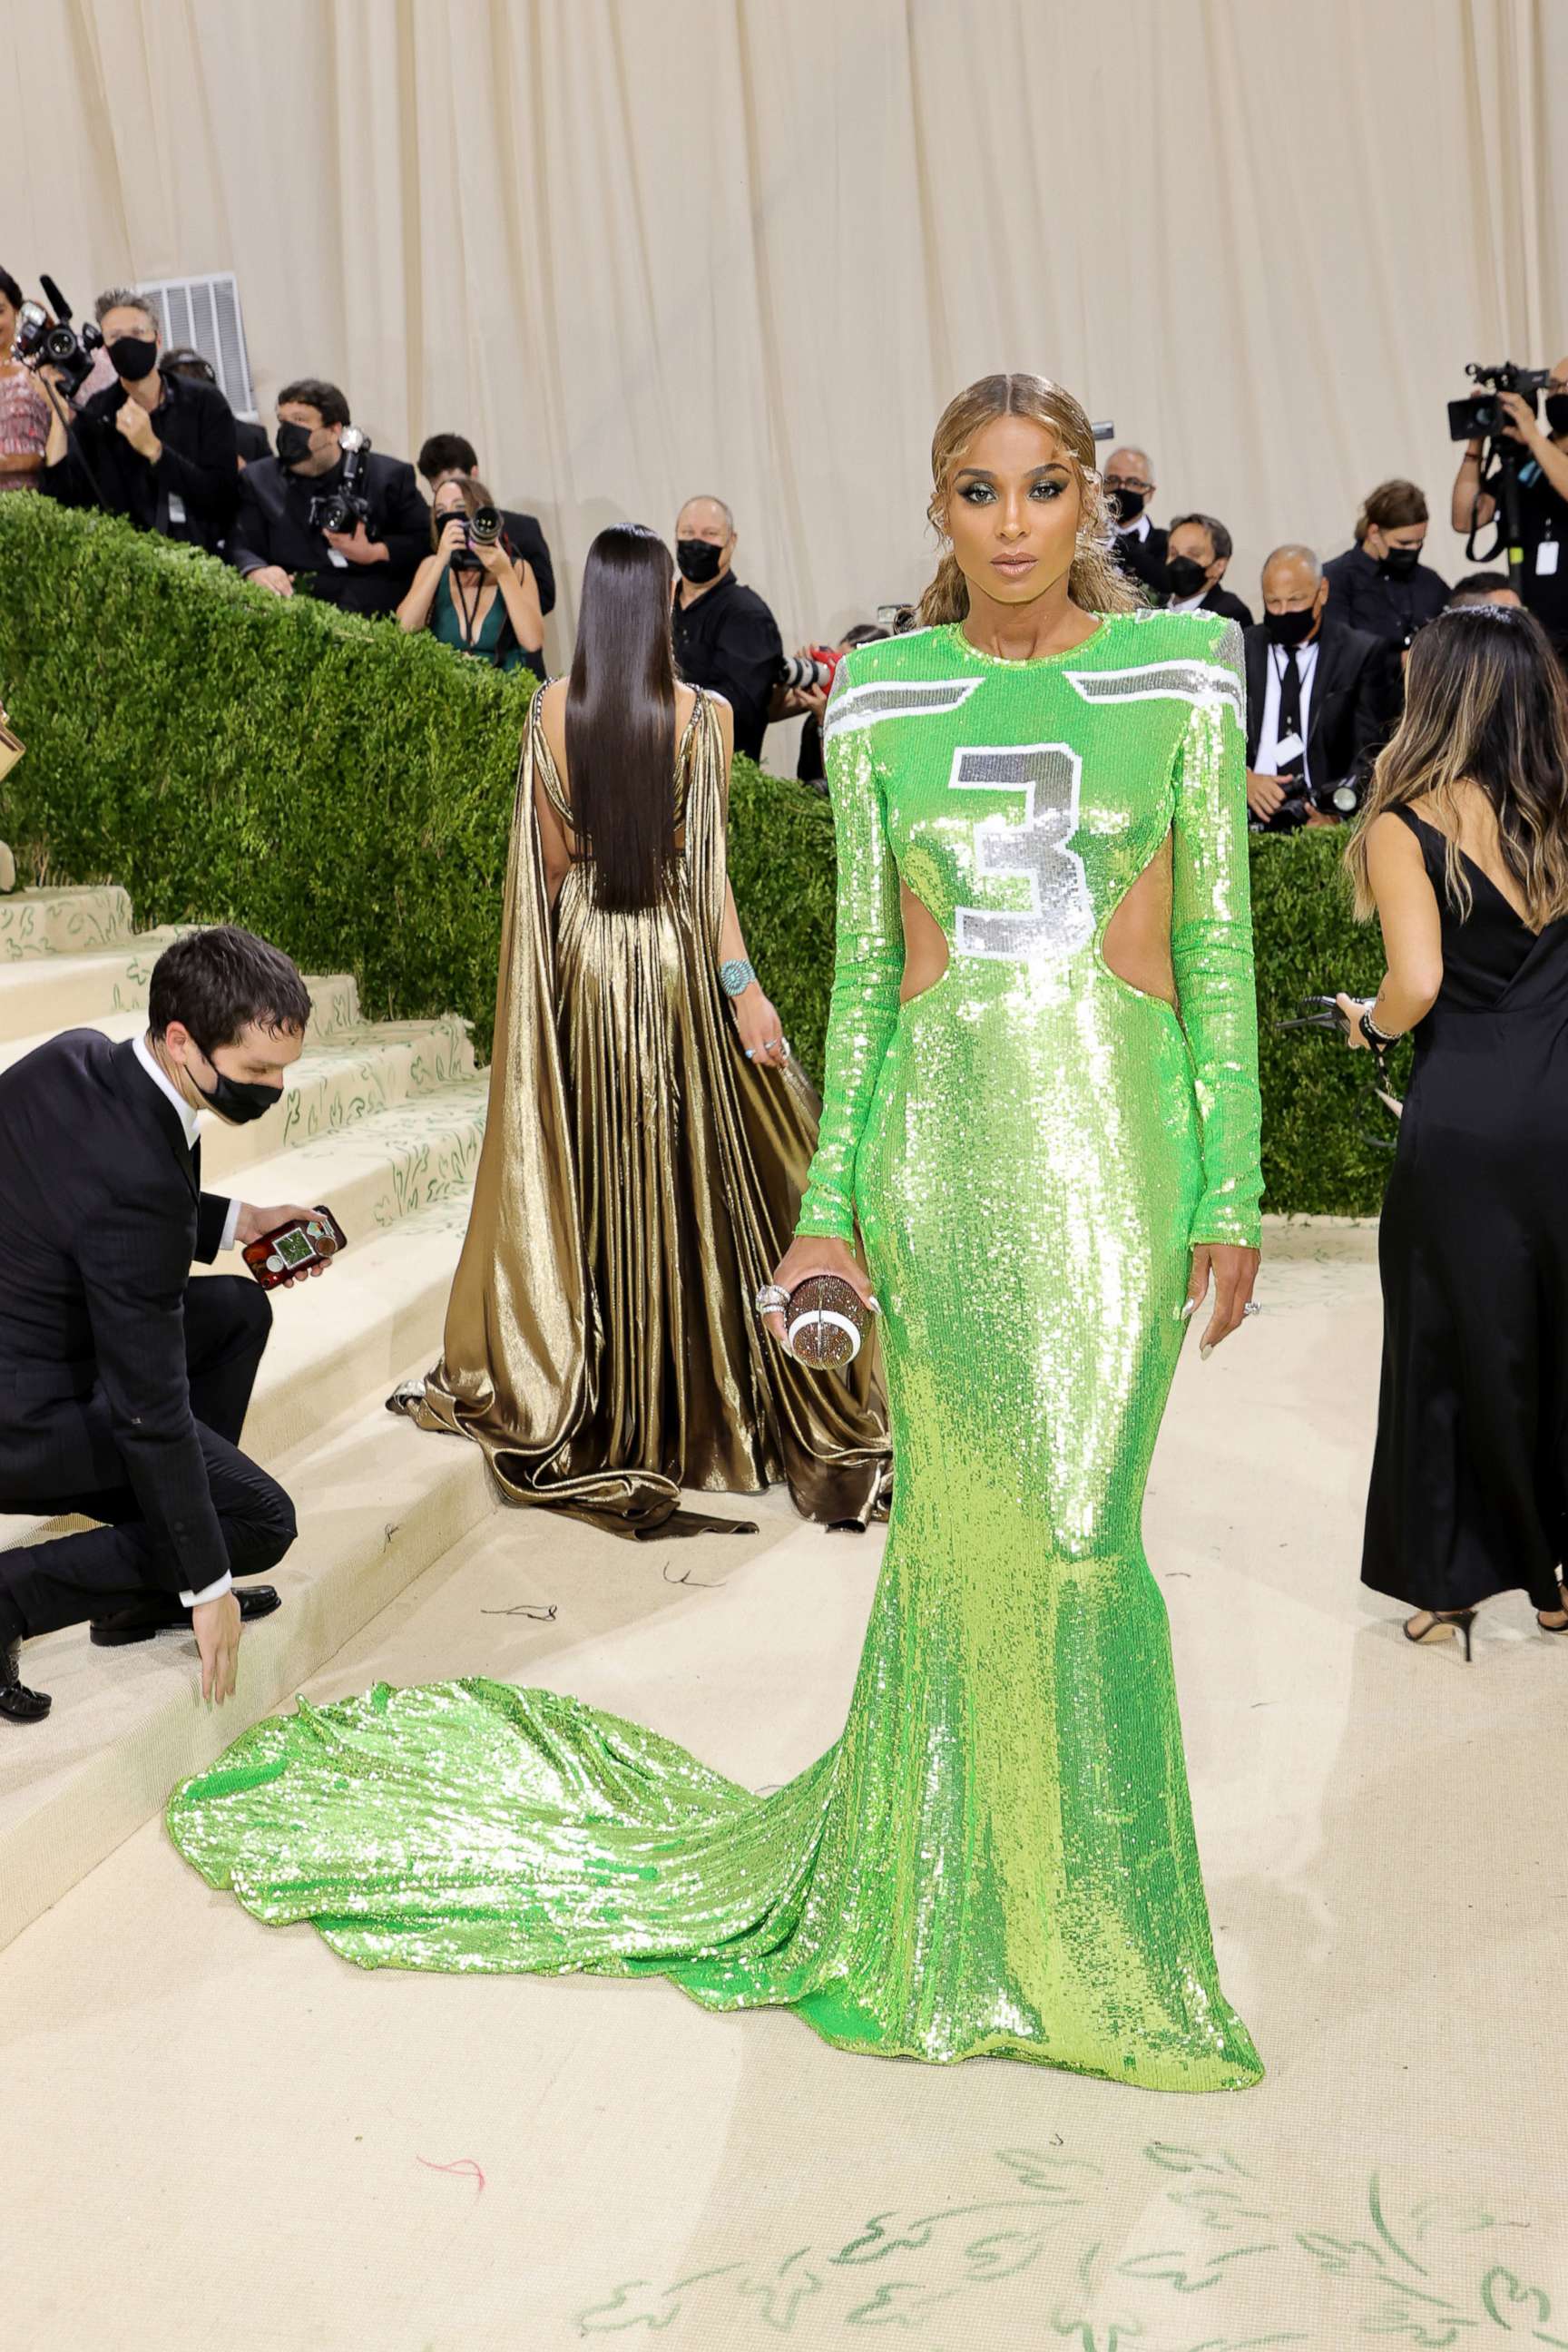 Met Gala 2021: All You Need to Know